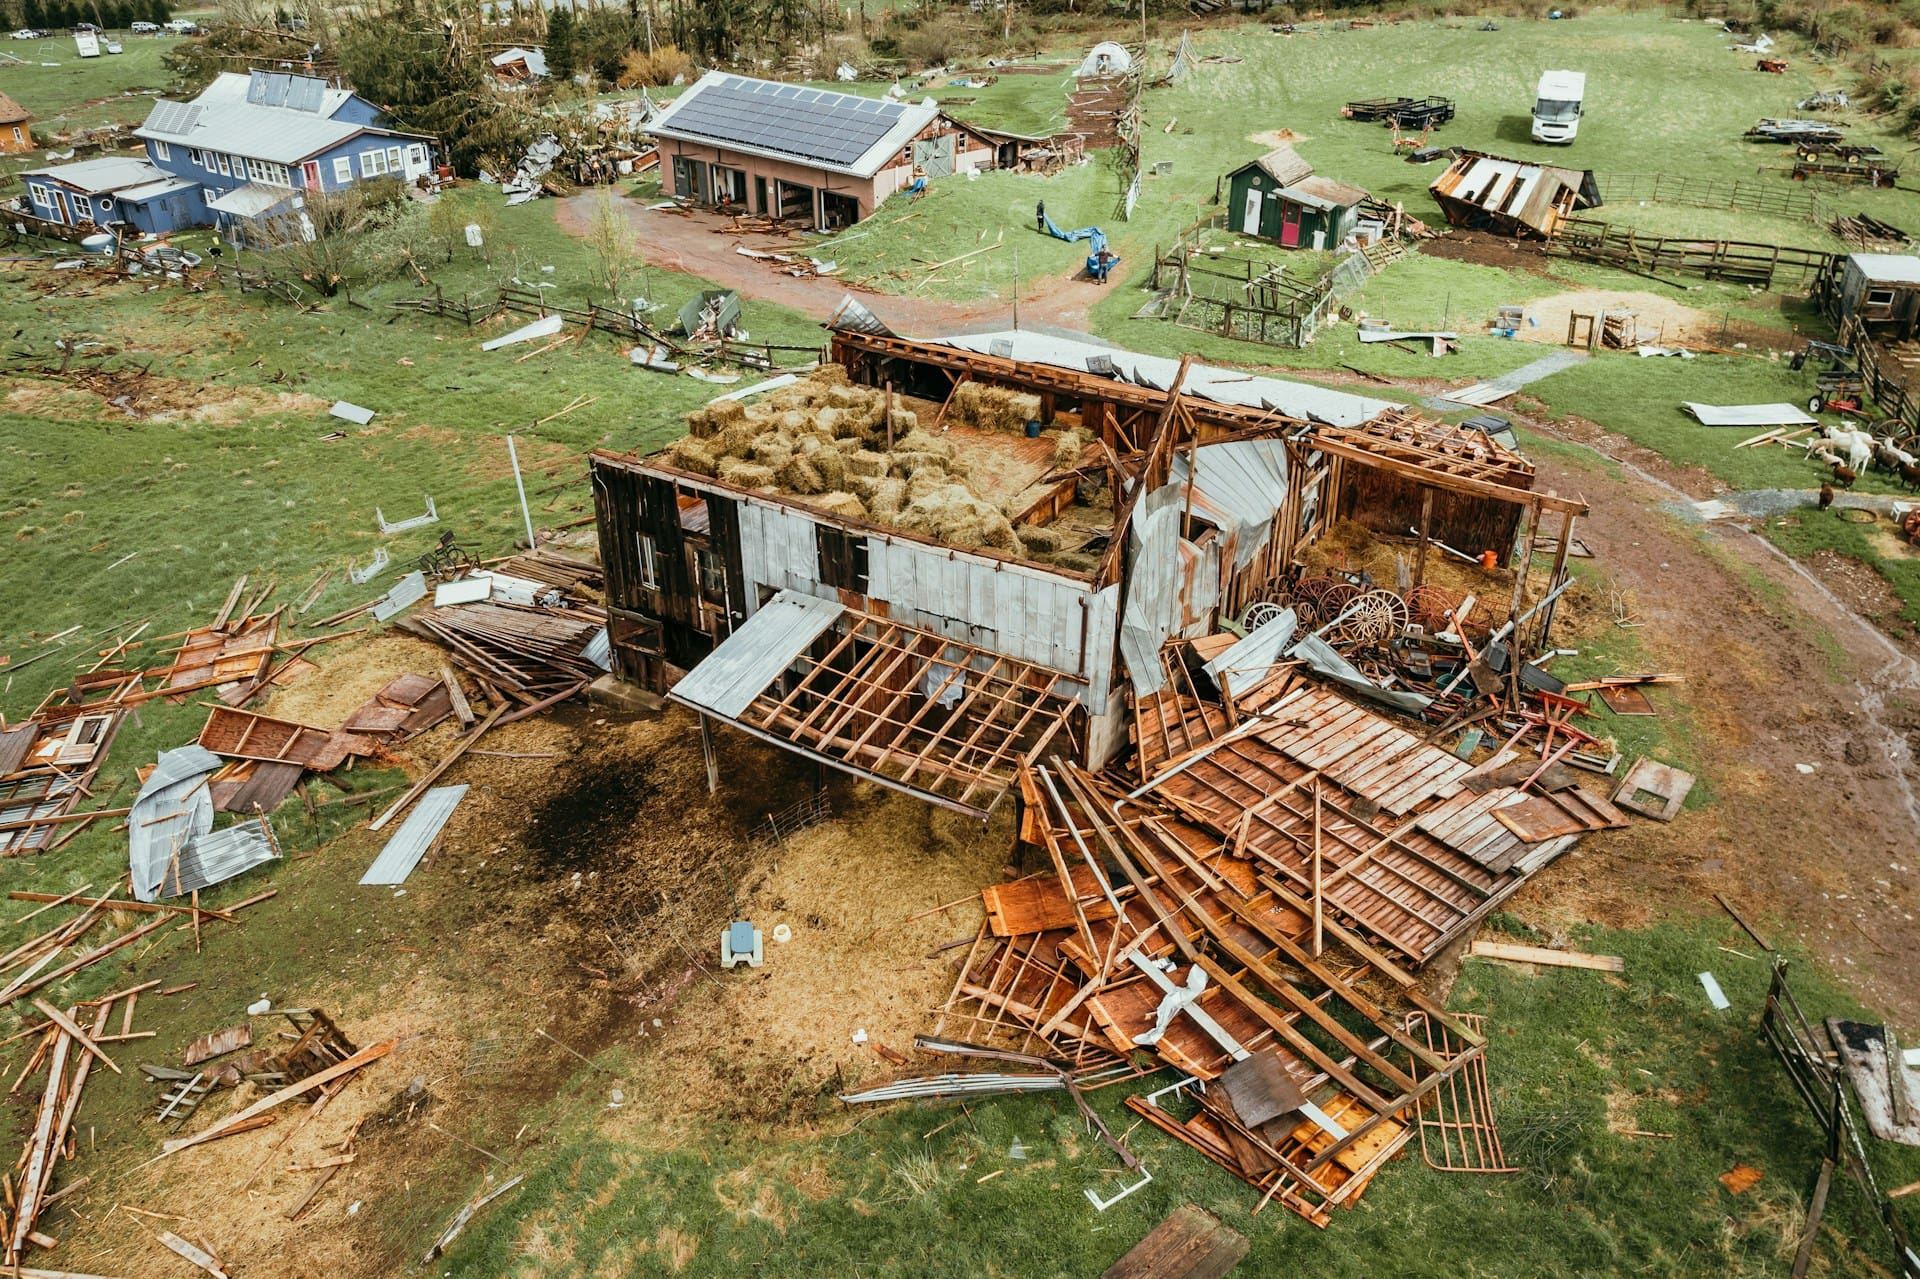 Shattered Windows and Flying Debris: Assessing the Impact of Tornadoes on Buildings